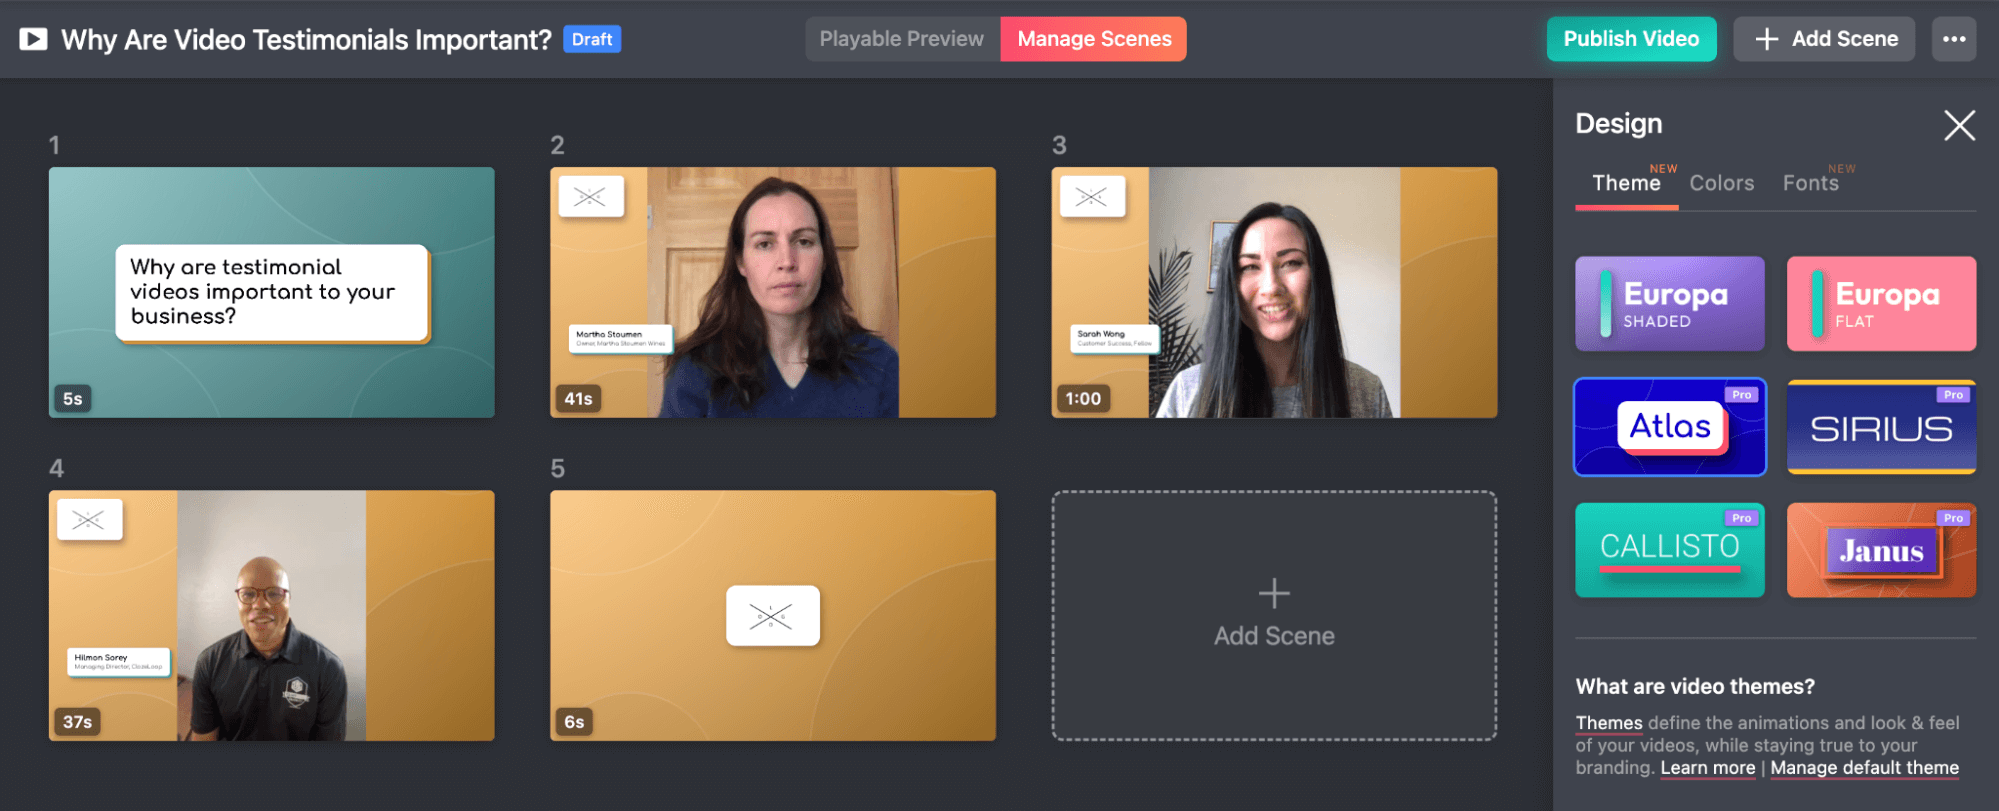 Adding Scenes and Theme Design Options in Vocal Video